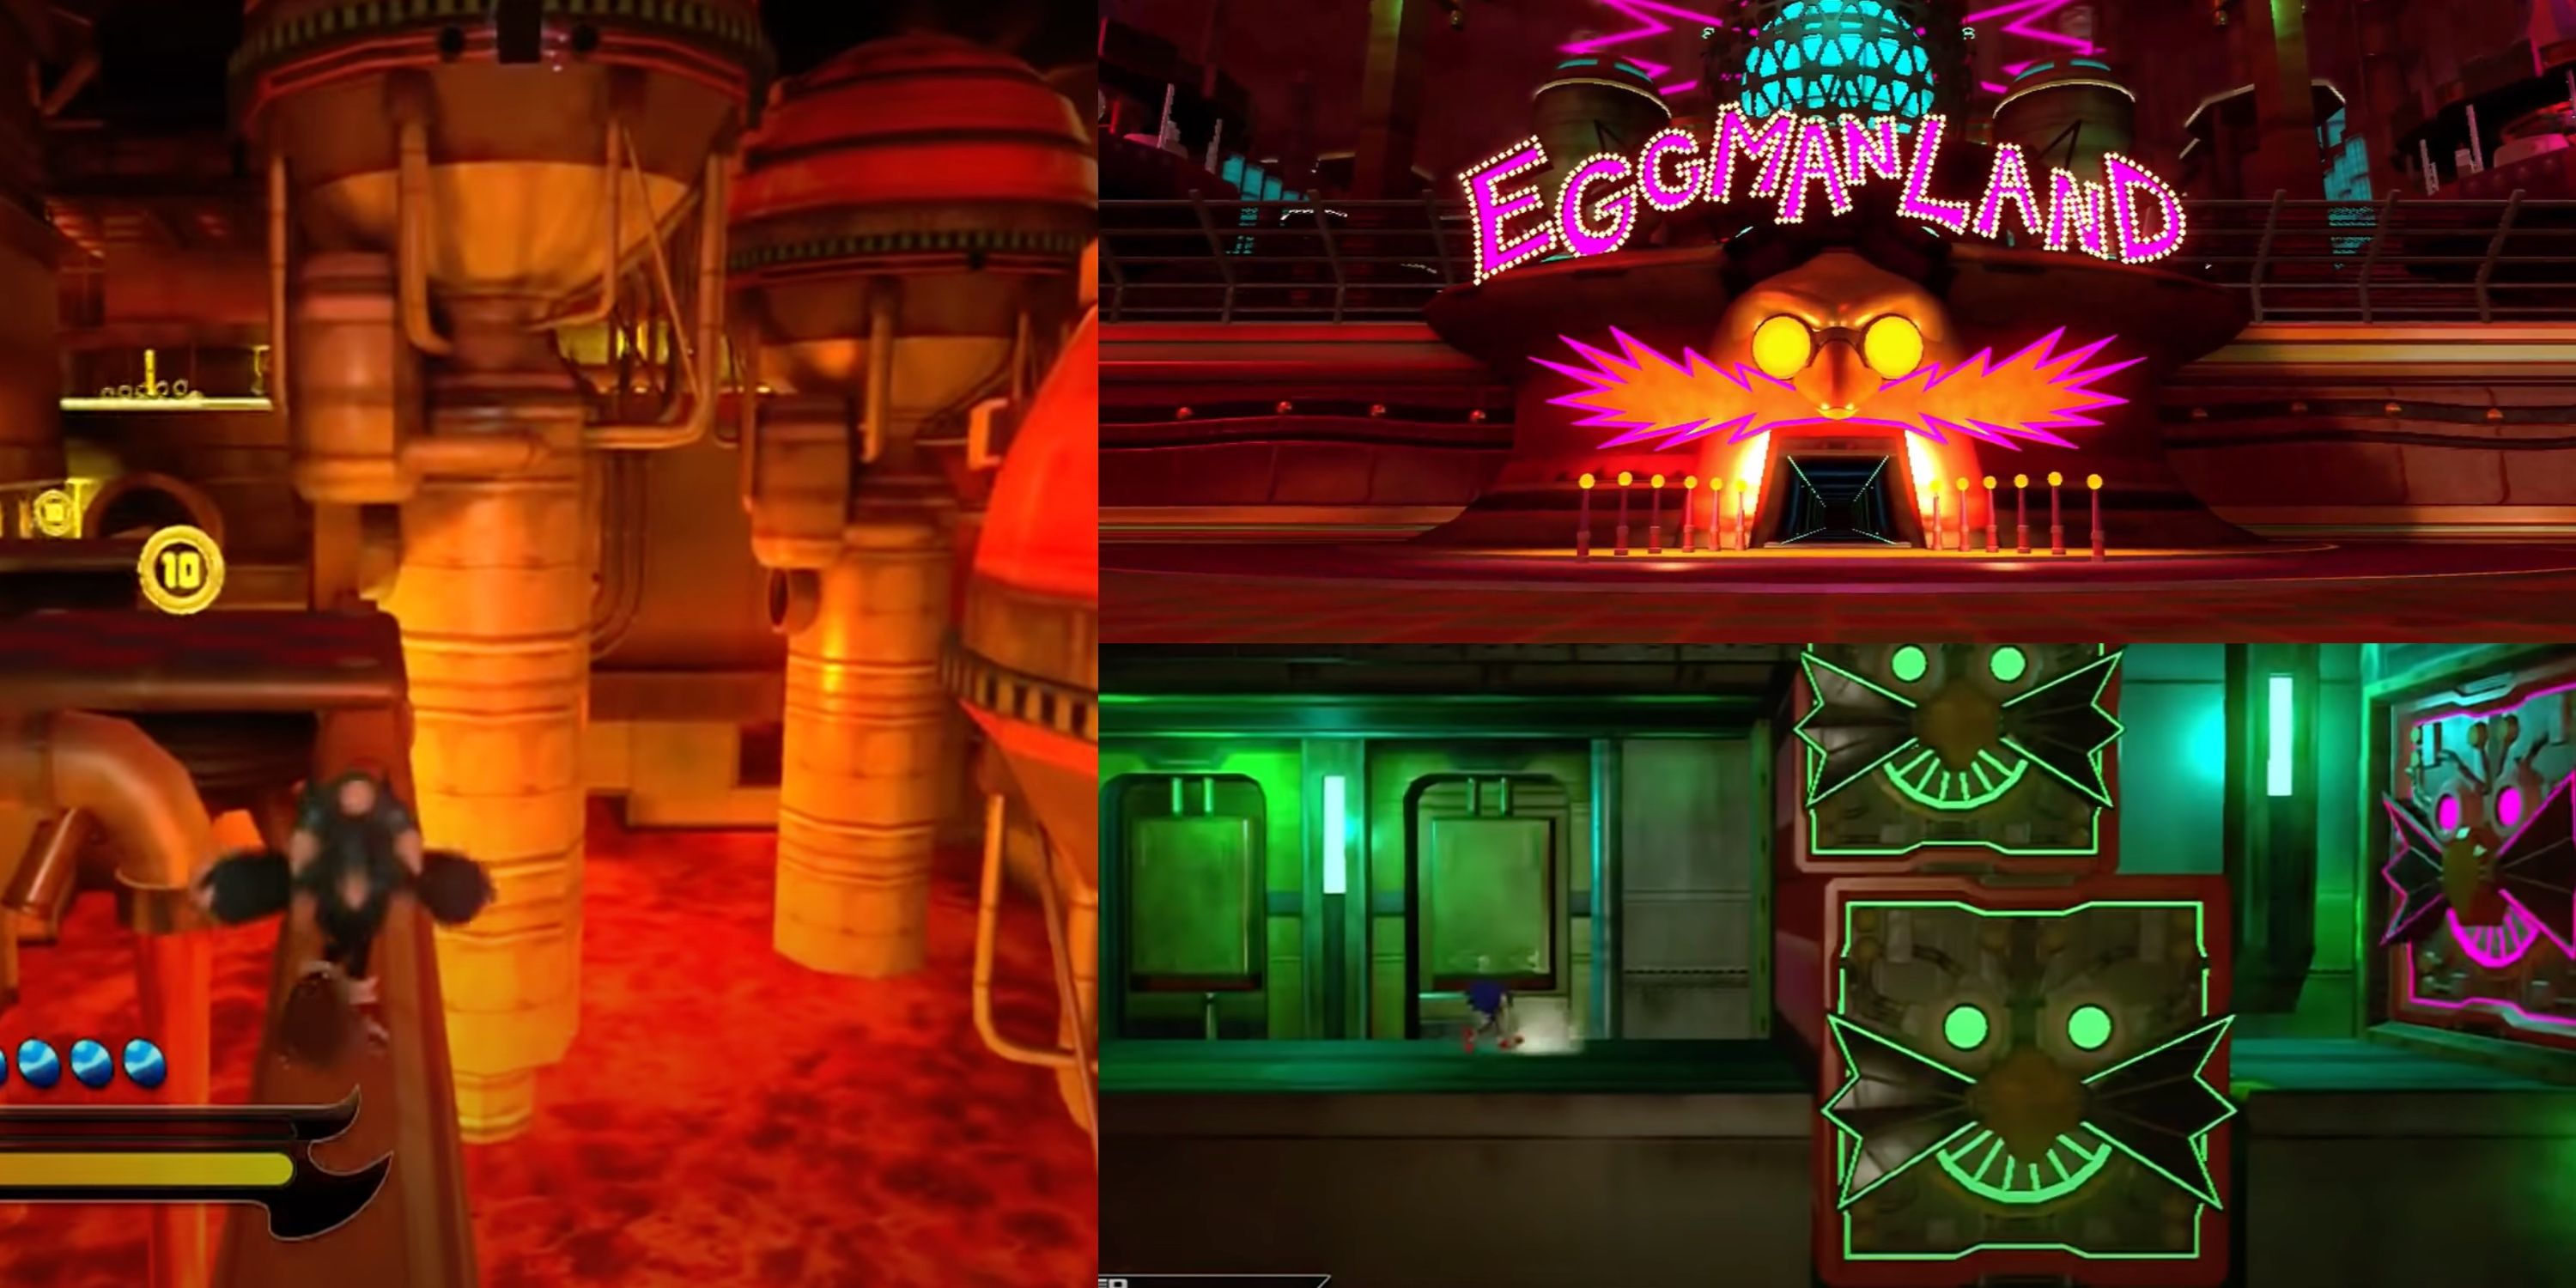 The entrance to Eggmanland, and sonic crossing lava and avoiding blocks with egg man's visage